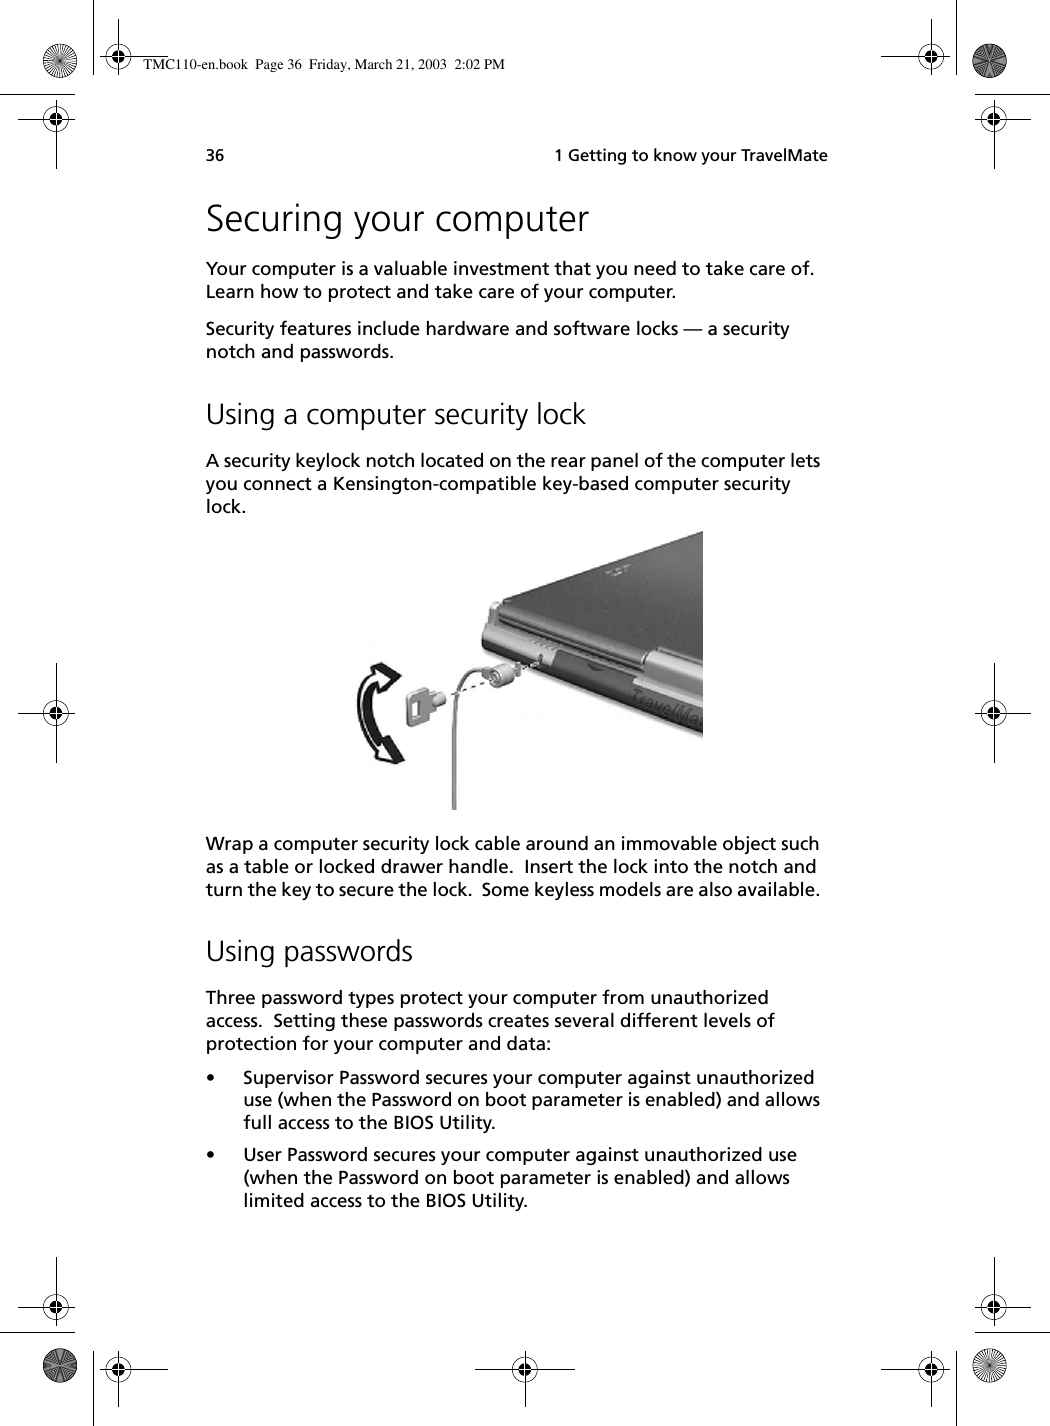  1 Getting to know your TravelMate36Securing your computerYour computer is a valuable investment that you need to take care of.  Learn how to protect and take care of your computer.Security features include hardware and software locks — a security notch and passwords.Using a computer security lockA security keylock notch located on the rear panel of the computer lets you connect a Kensington-compatible key-based computer security lock.  Wrap a computer security lock cable around an immovable object such as a table or locked drawer handle.  Insert the lock into the notch and turn the key to secure the lock.  Some keyless models are also available. Using passwordsThree password types protect your computer from unauthorized access.  Setting these passwords creates several different levels of protection for your computer and data:• Supervisor Password secures your computer against unauthorized use (when the Password on boot parameter is enabled) and allows full access to the BIOS Utility.• User Password secures your computer against unauthorized use (when the Password on boot parameter is enabled) and allows limited access to the BIOS Utility.TMC110-en.book  Page 36  Friday, March 21, 2003  2:02 PM